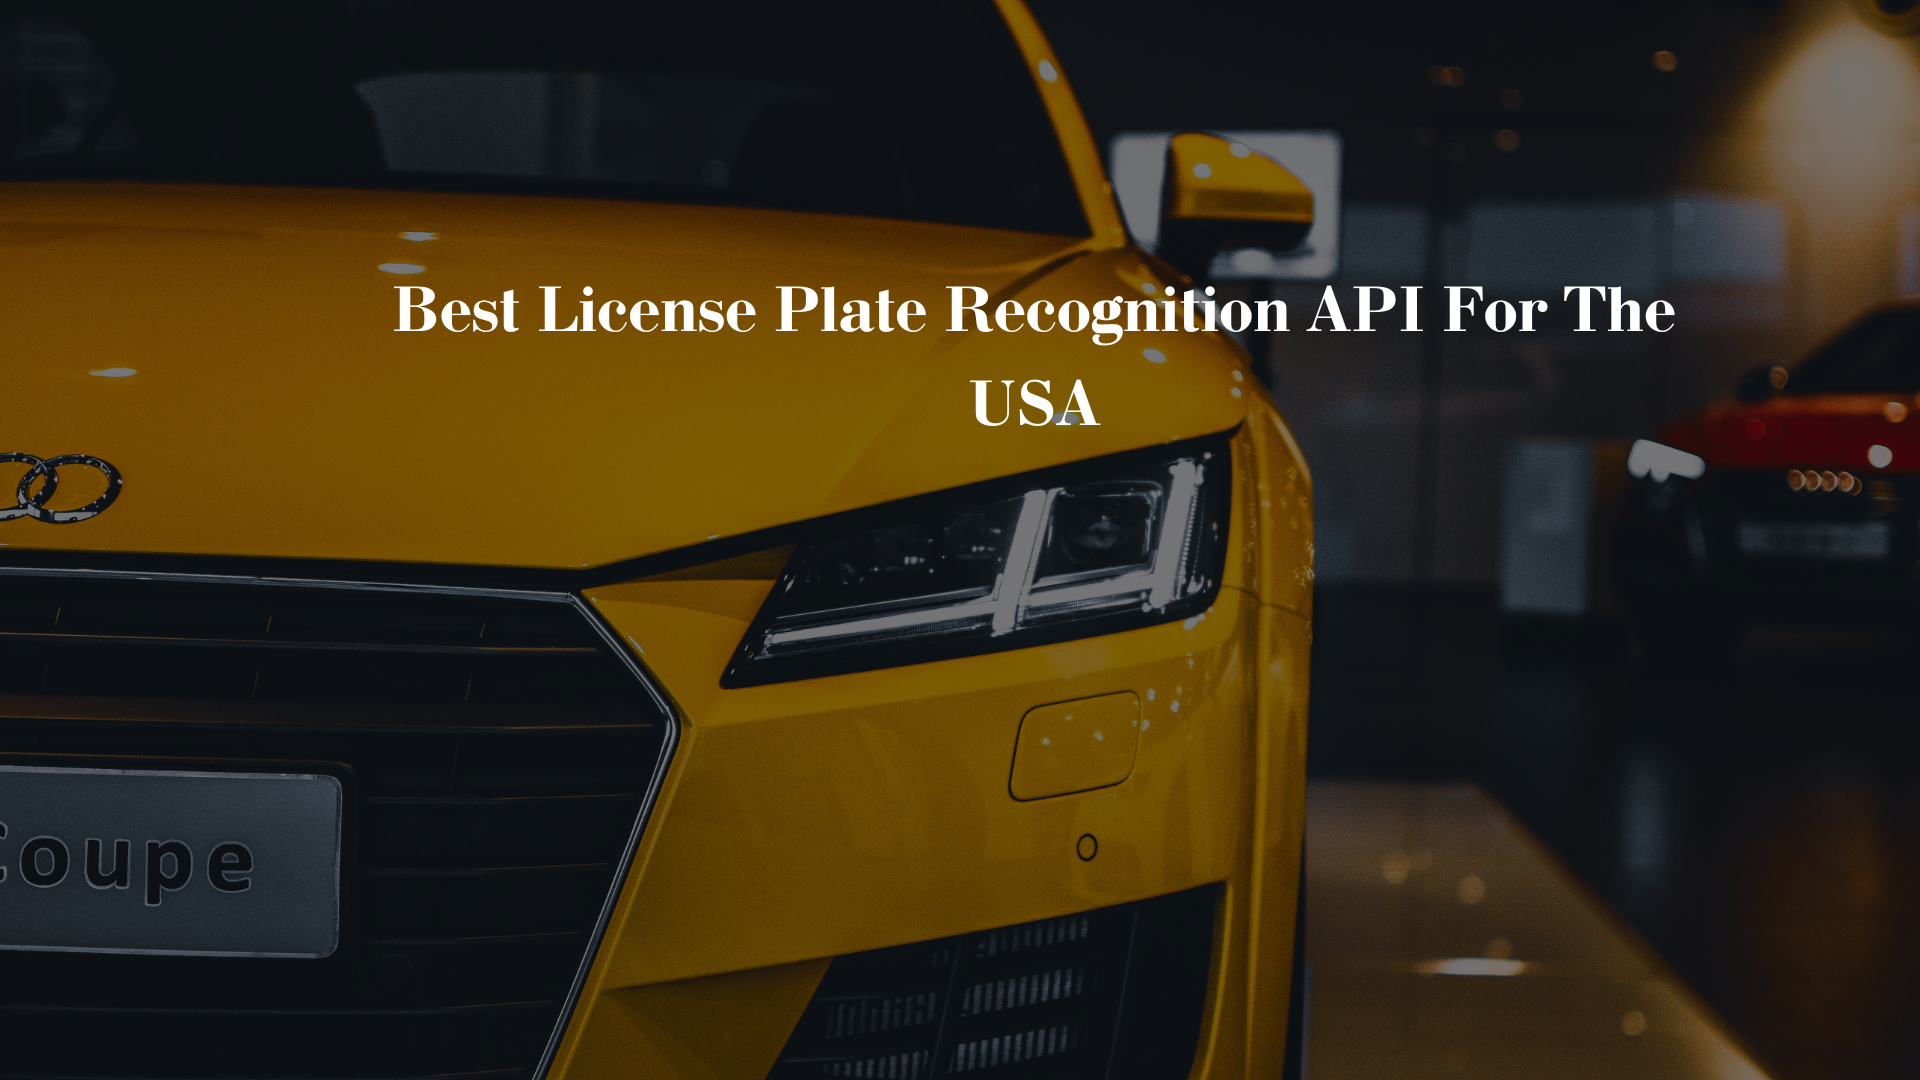 Best License Plate Recognition API For The USA